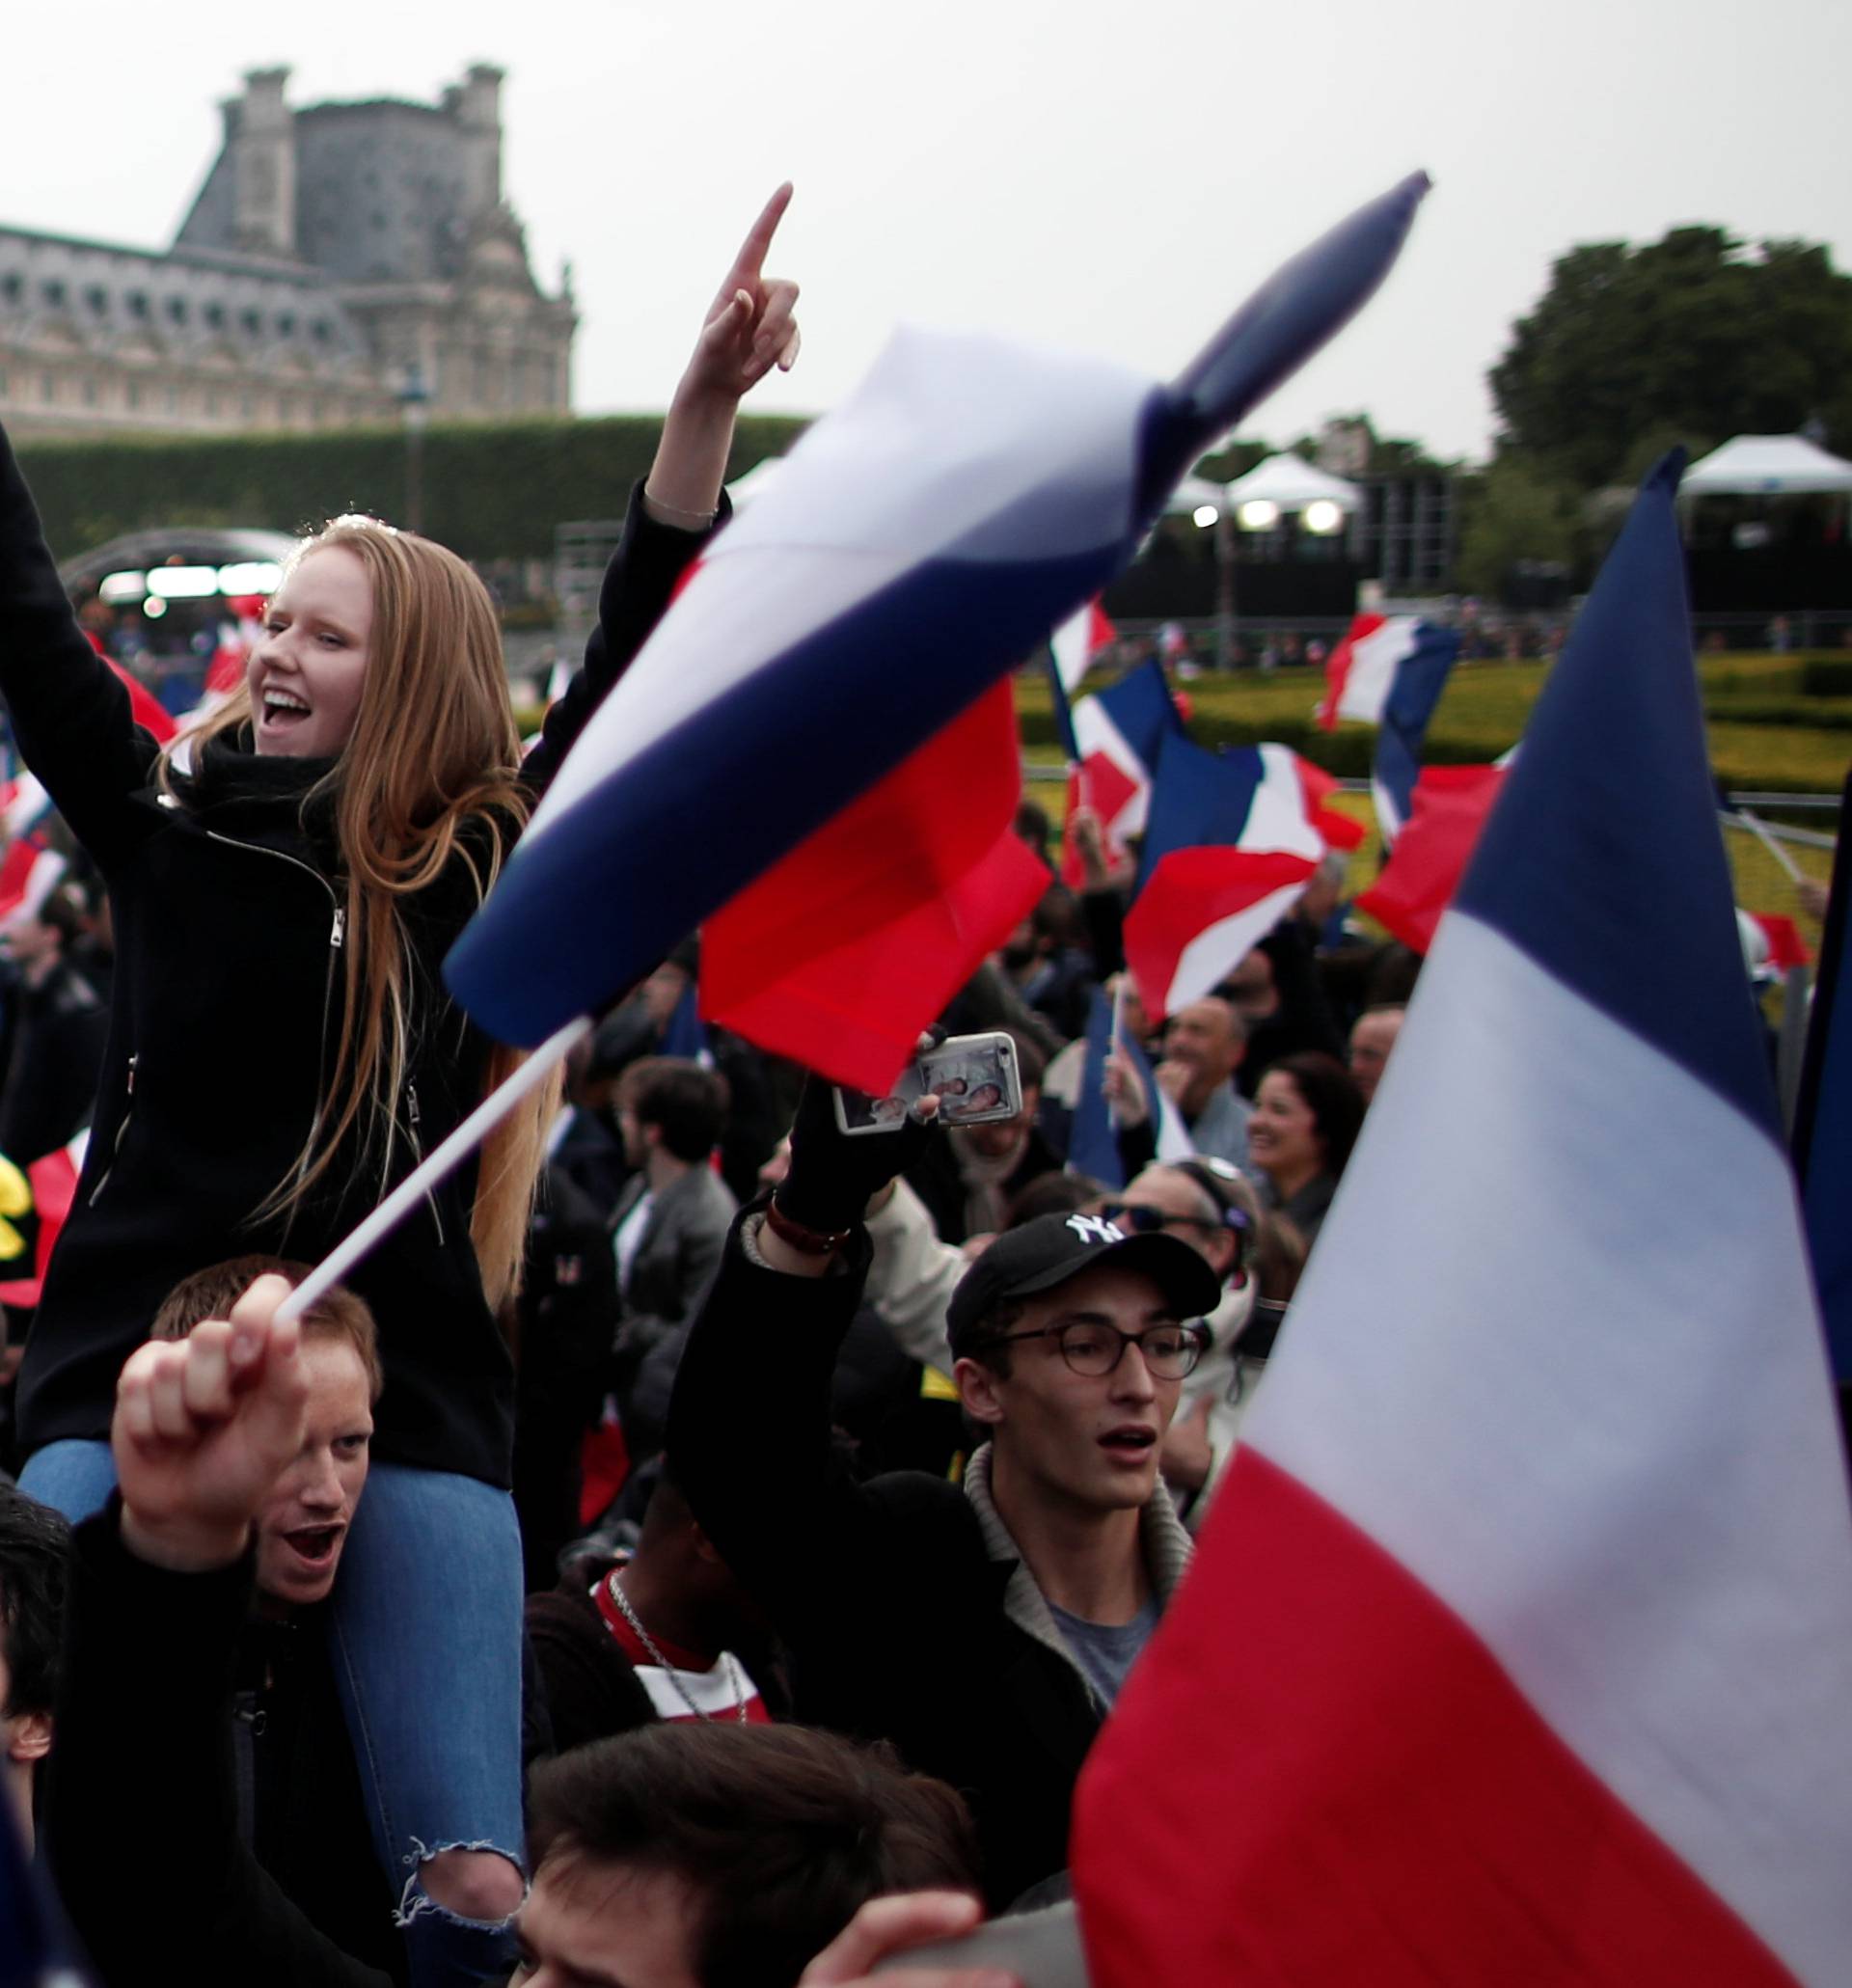 Supporters of Emmanuel Macron celebrate near the Louvre museum after results were announced in the second round vote of the 2017 French presidential elections, in Paris